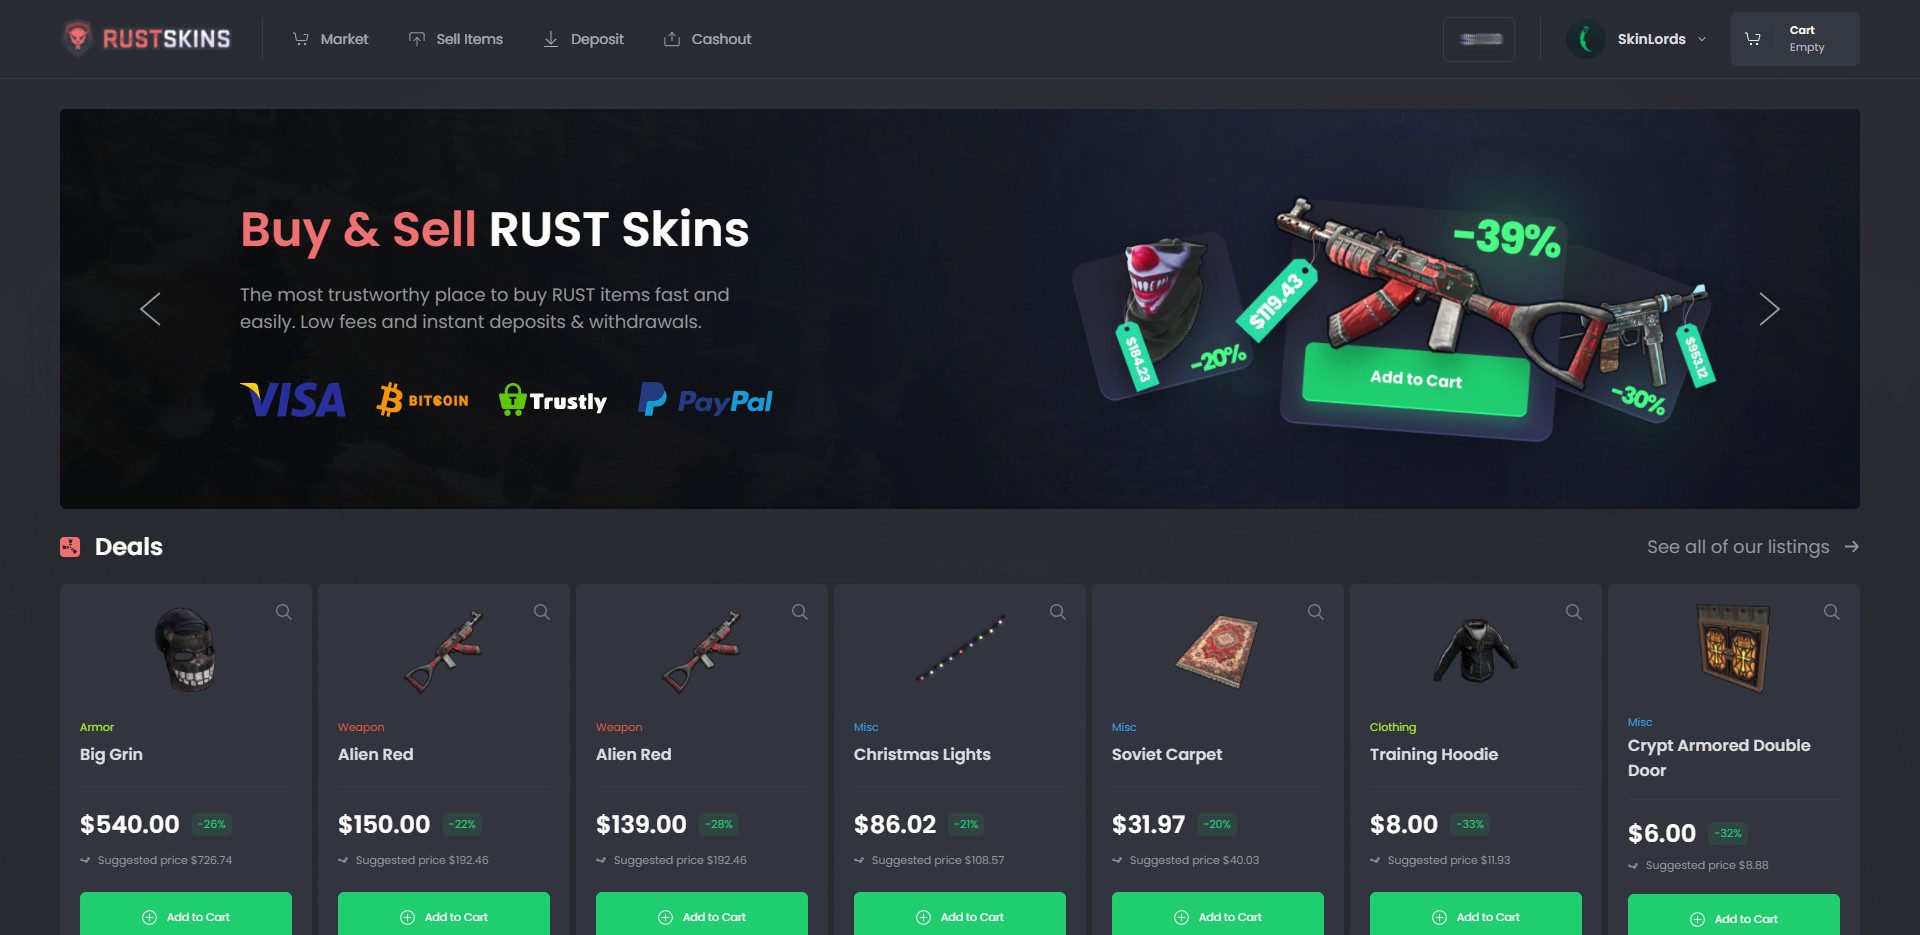 RustSkins.com Marketplace Banner and Top Items